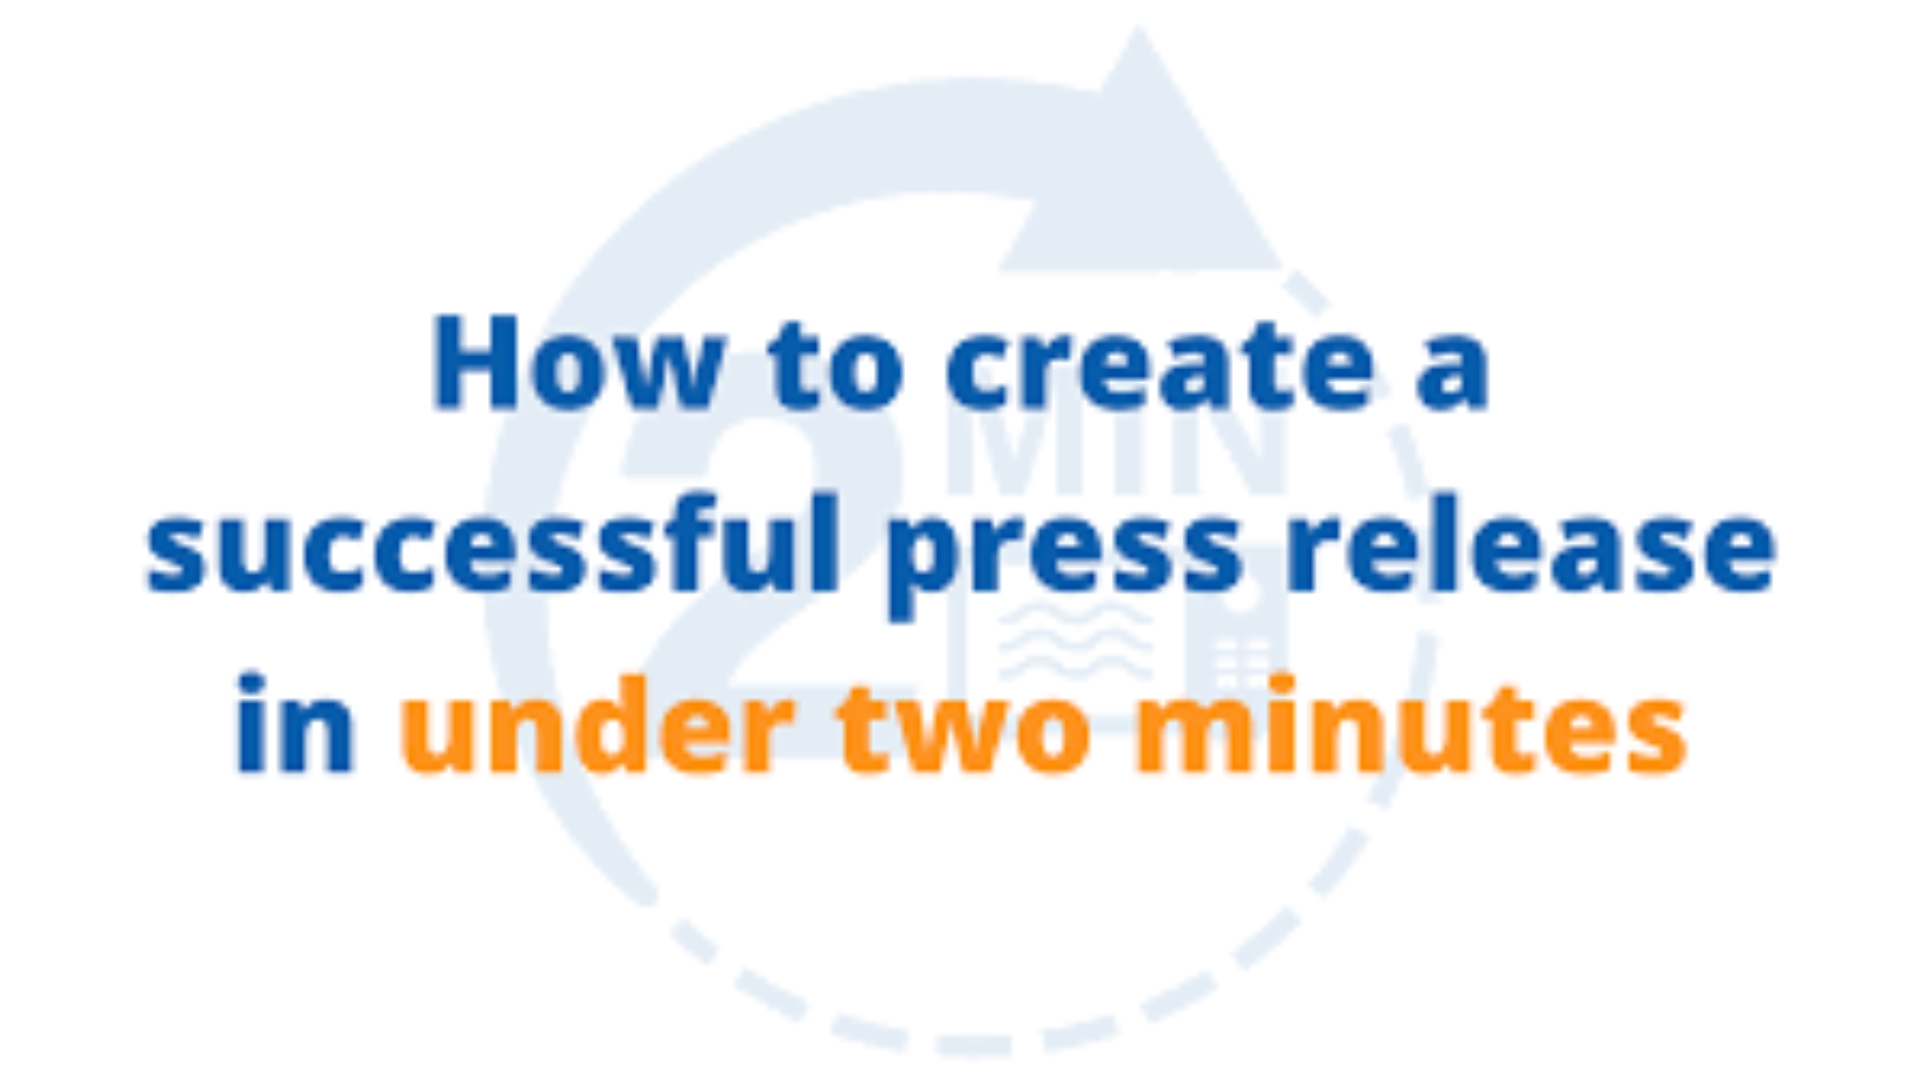 How to create a successful press release in under two minutes